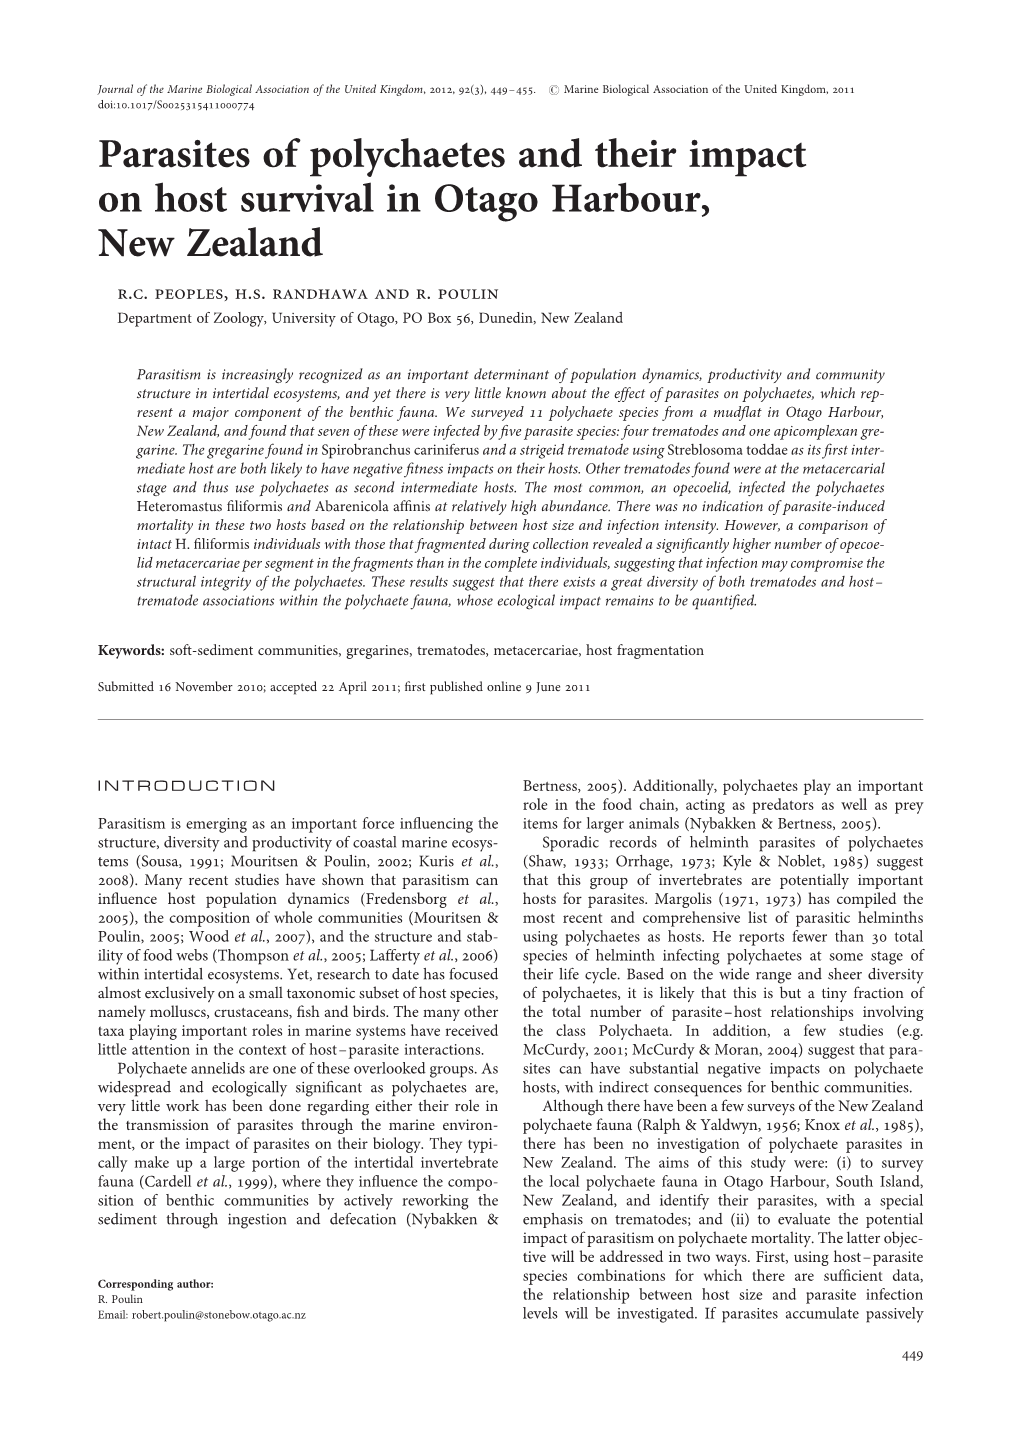 Parasites of Polychaetes and Their Impact on Host Survival in Otago Harbour, New Zealand R.C